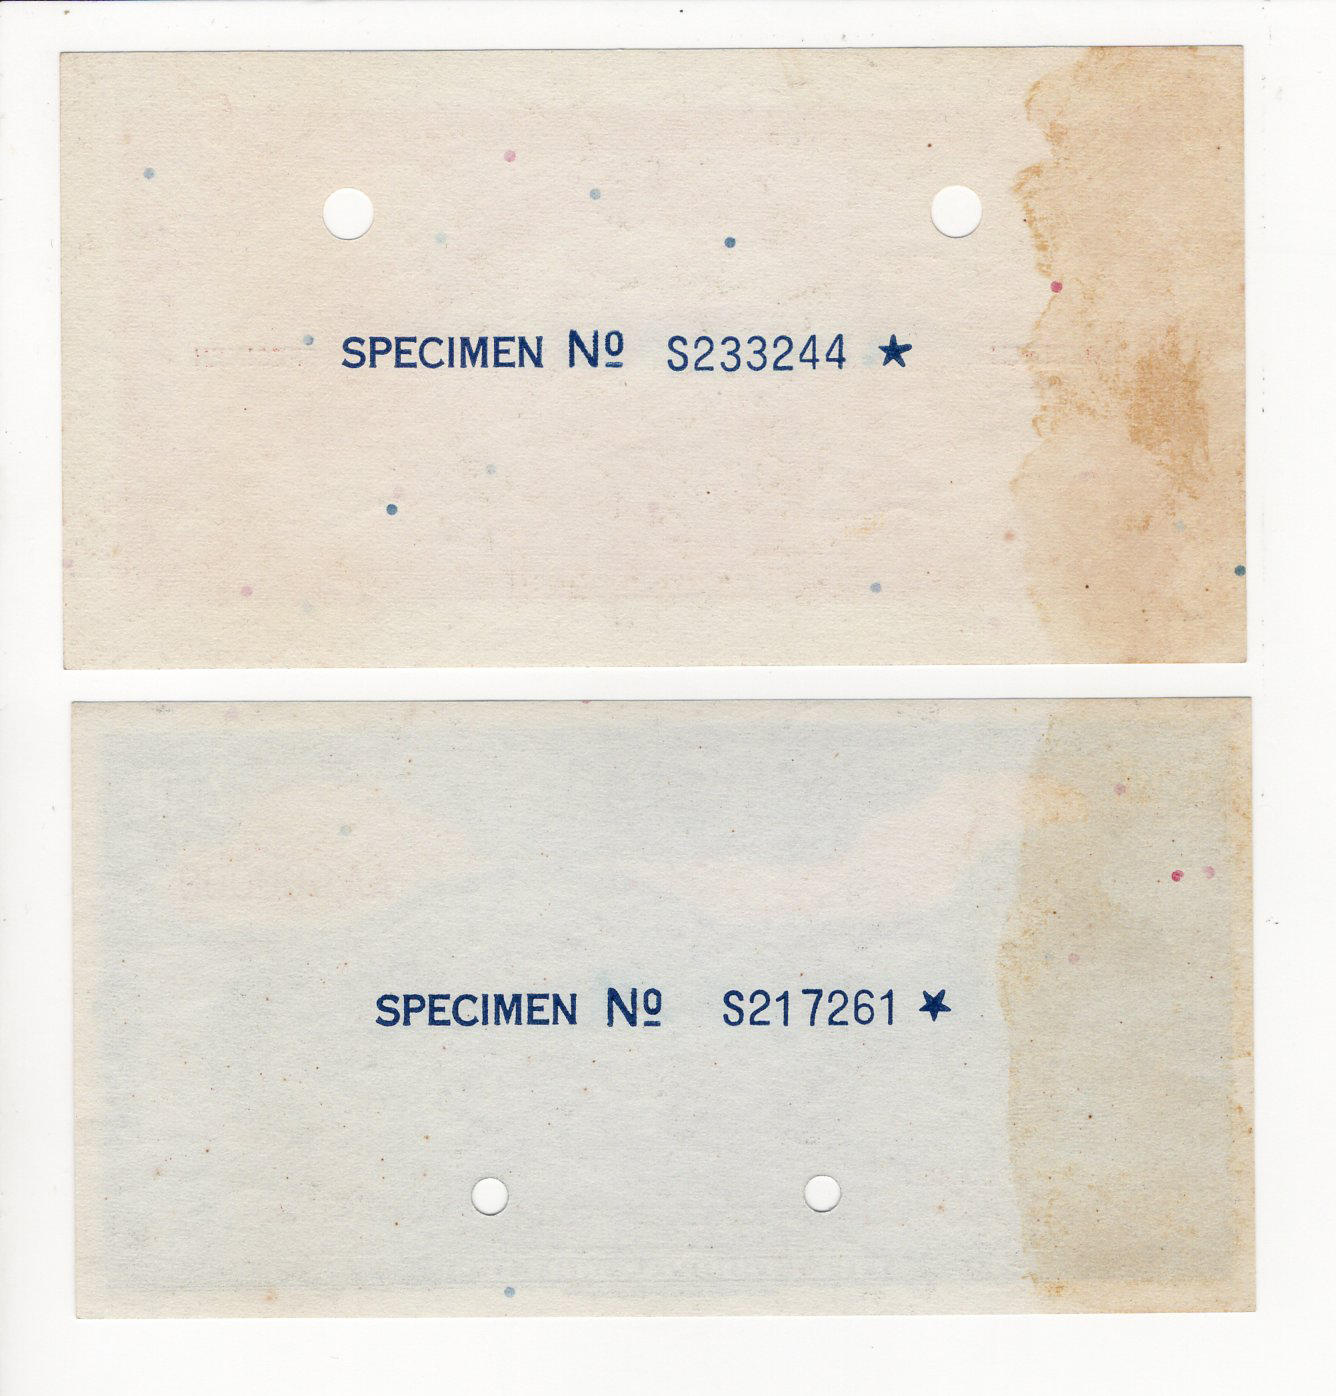 Ethiopia 5 Dollars (2) a set of obverse and reverse SPECIMEN notes for the 1945 issue, two - Image 2 of 2